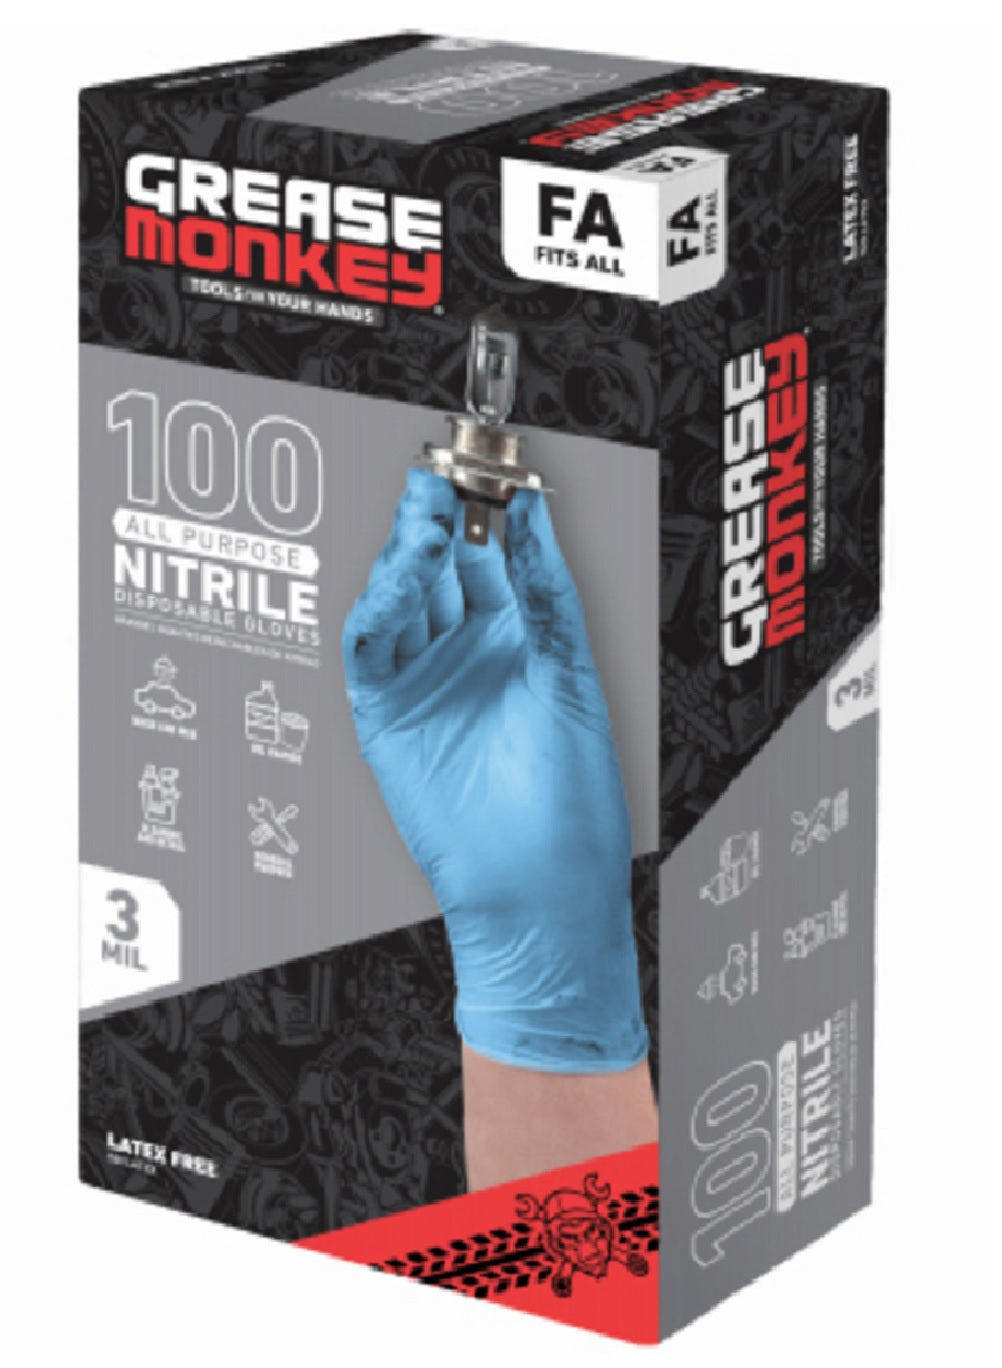 Grease Monkey 13570-110 Disposable Nitrile Glove, 100 Count – Toolbox Supply